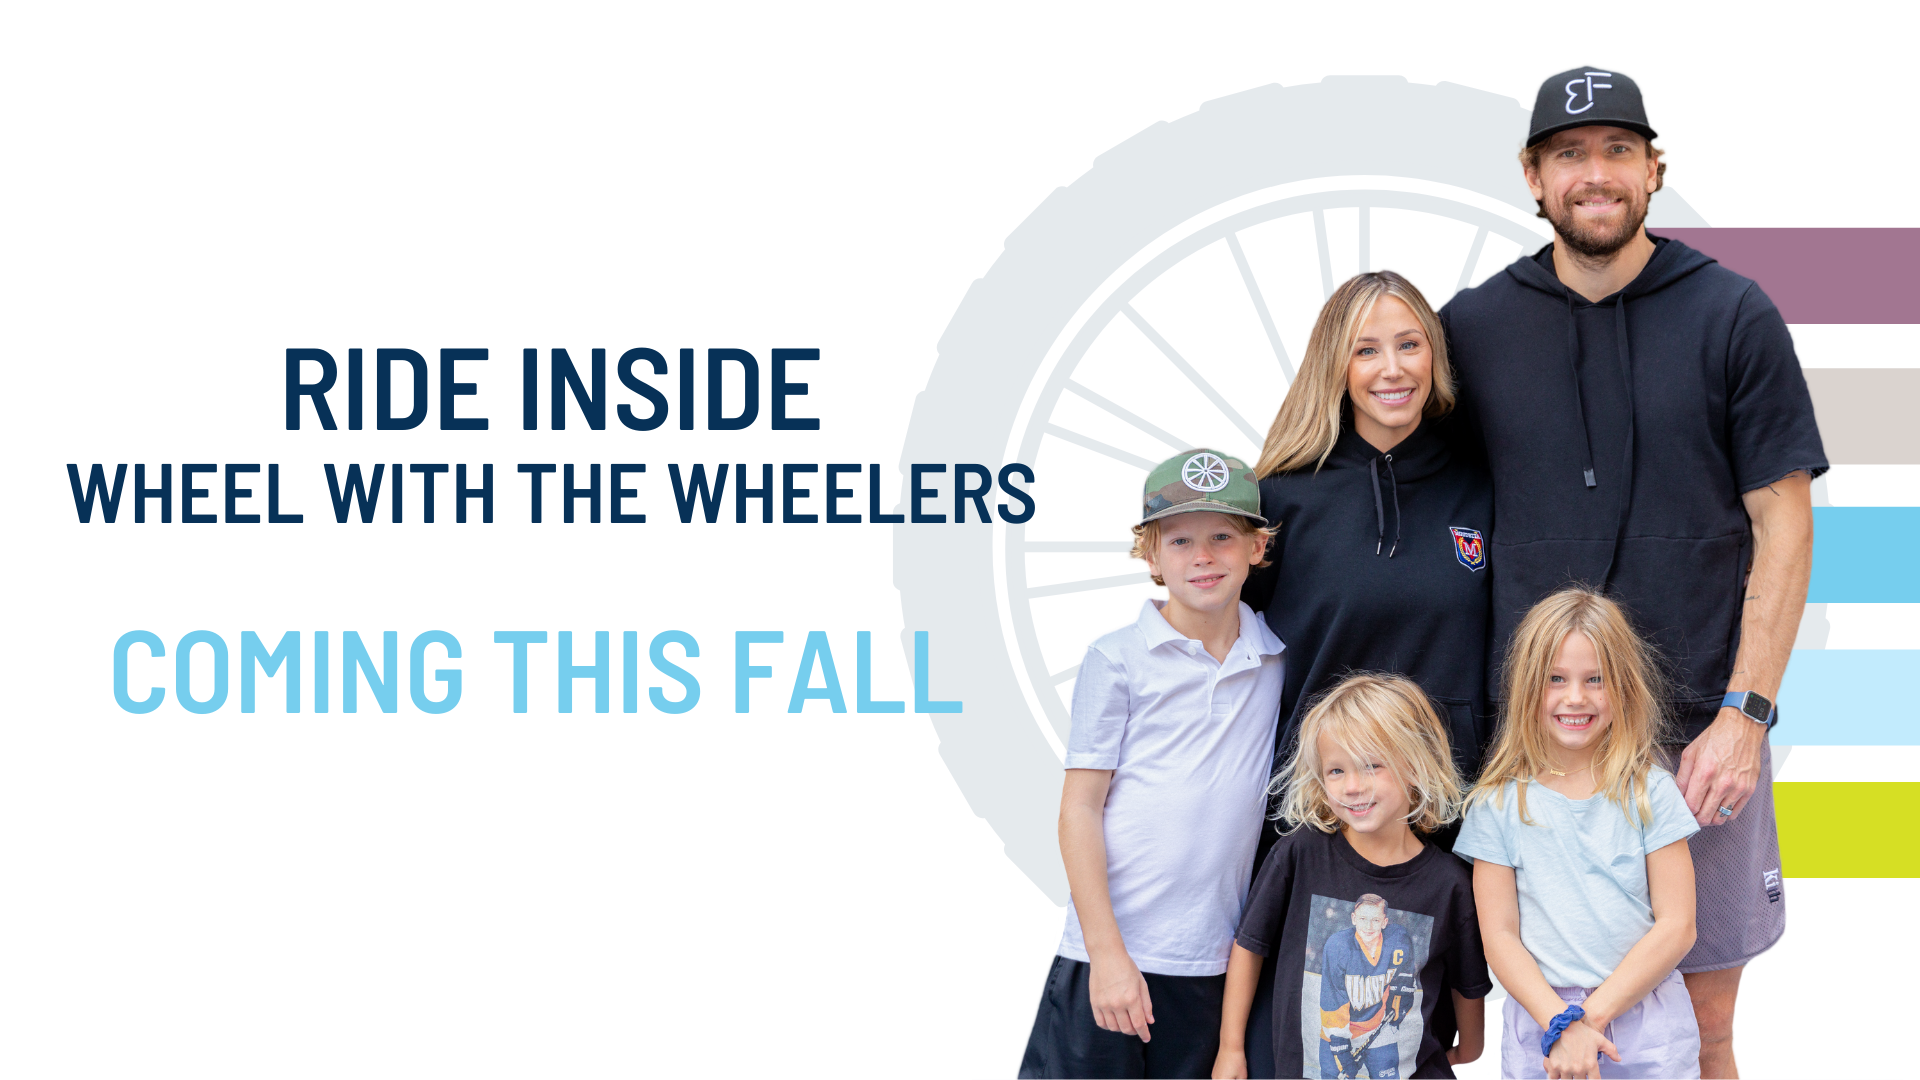 COMING THIS FALL 2022 Ride Inside Wheel with the Wheelers